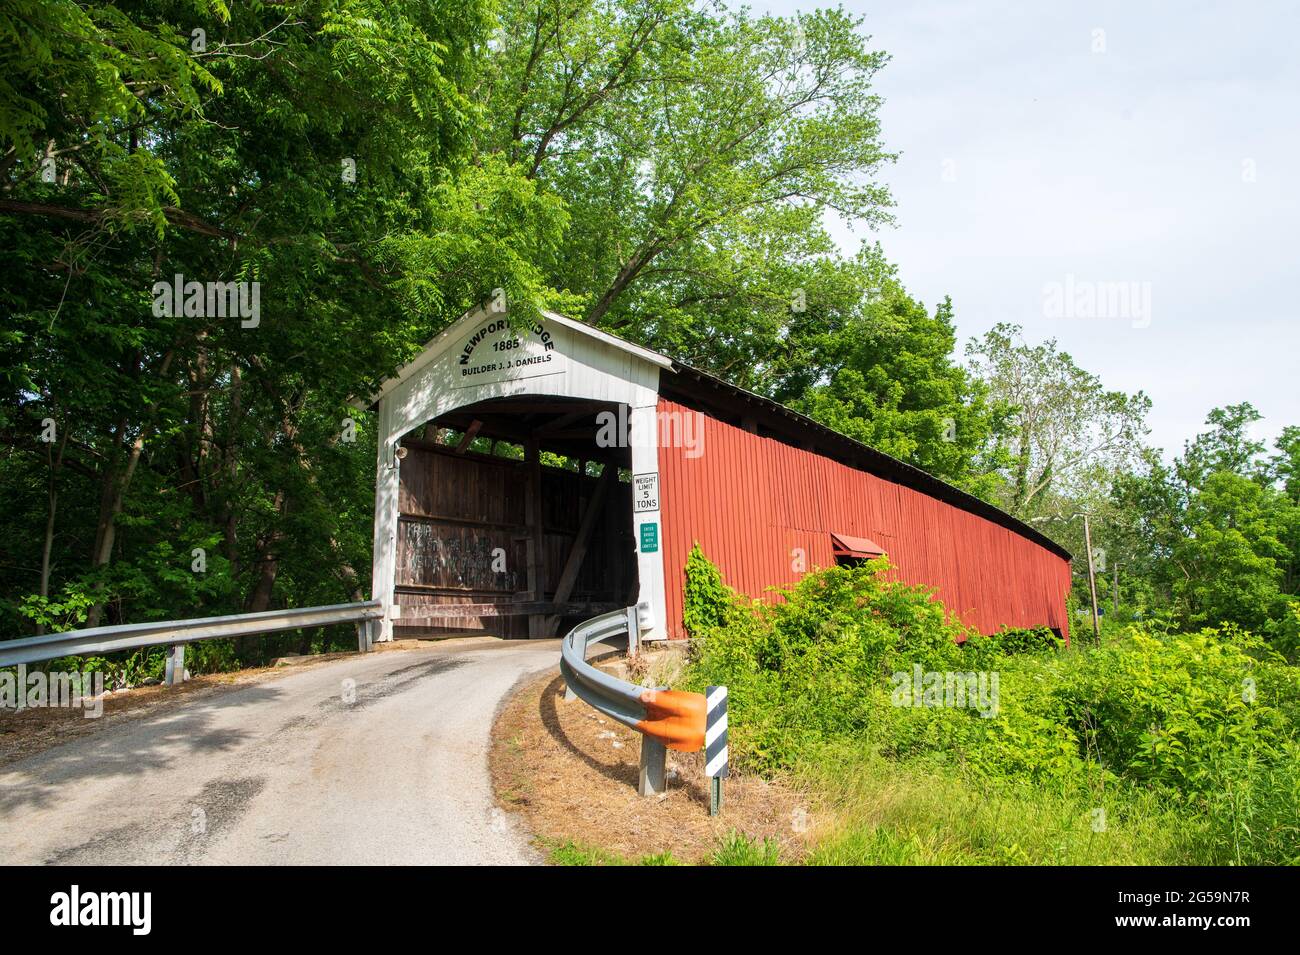 Newport Covered Bridge, also known as the Morehead Covered Bridge, is a historic Burr Arch Truss covered bridge located in Vermillion Township, Vermil Stock Photo